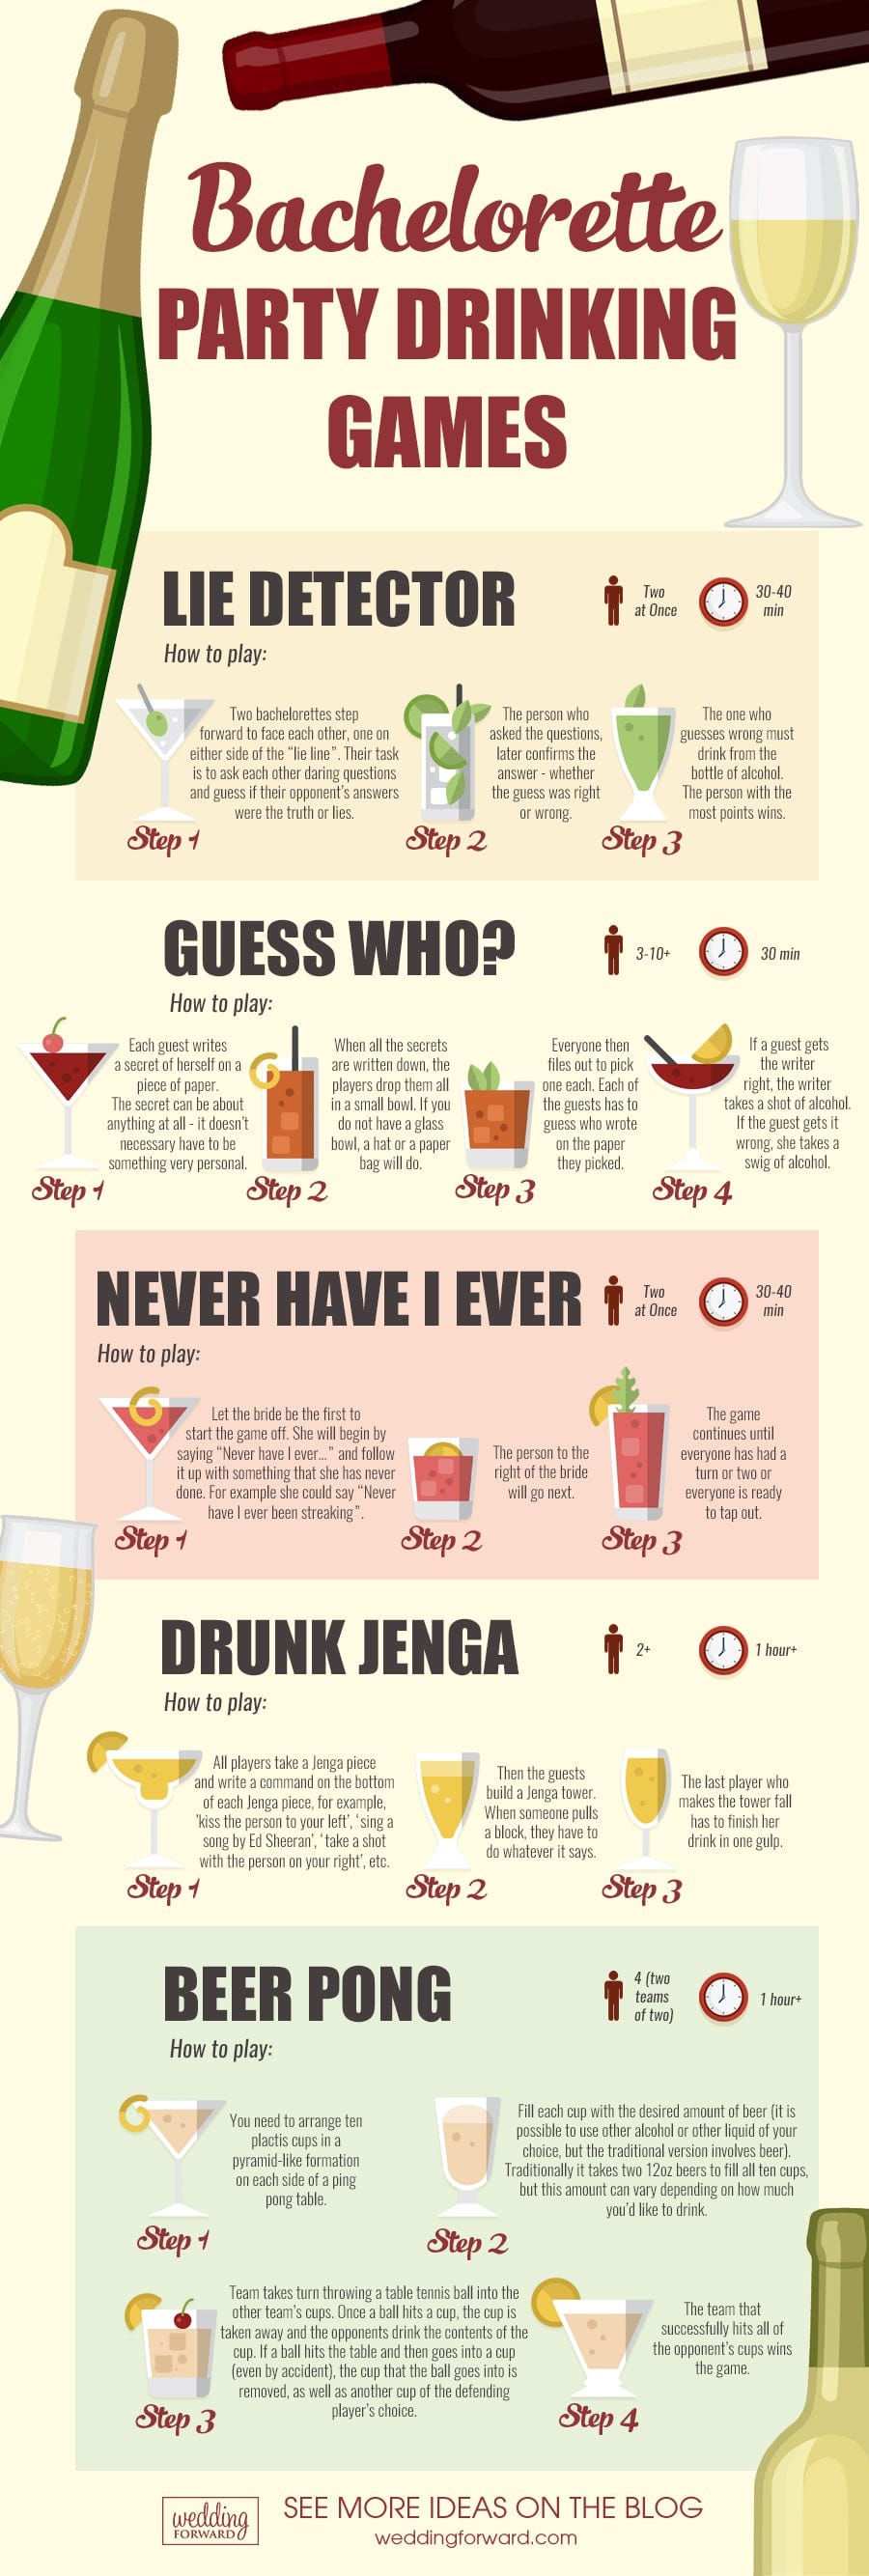 bachelorette party drinking games infographic